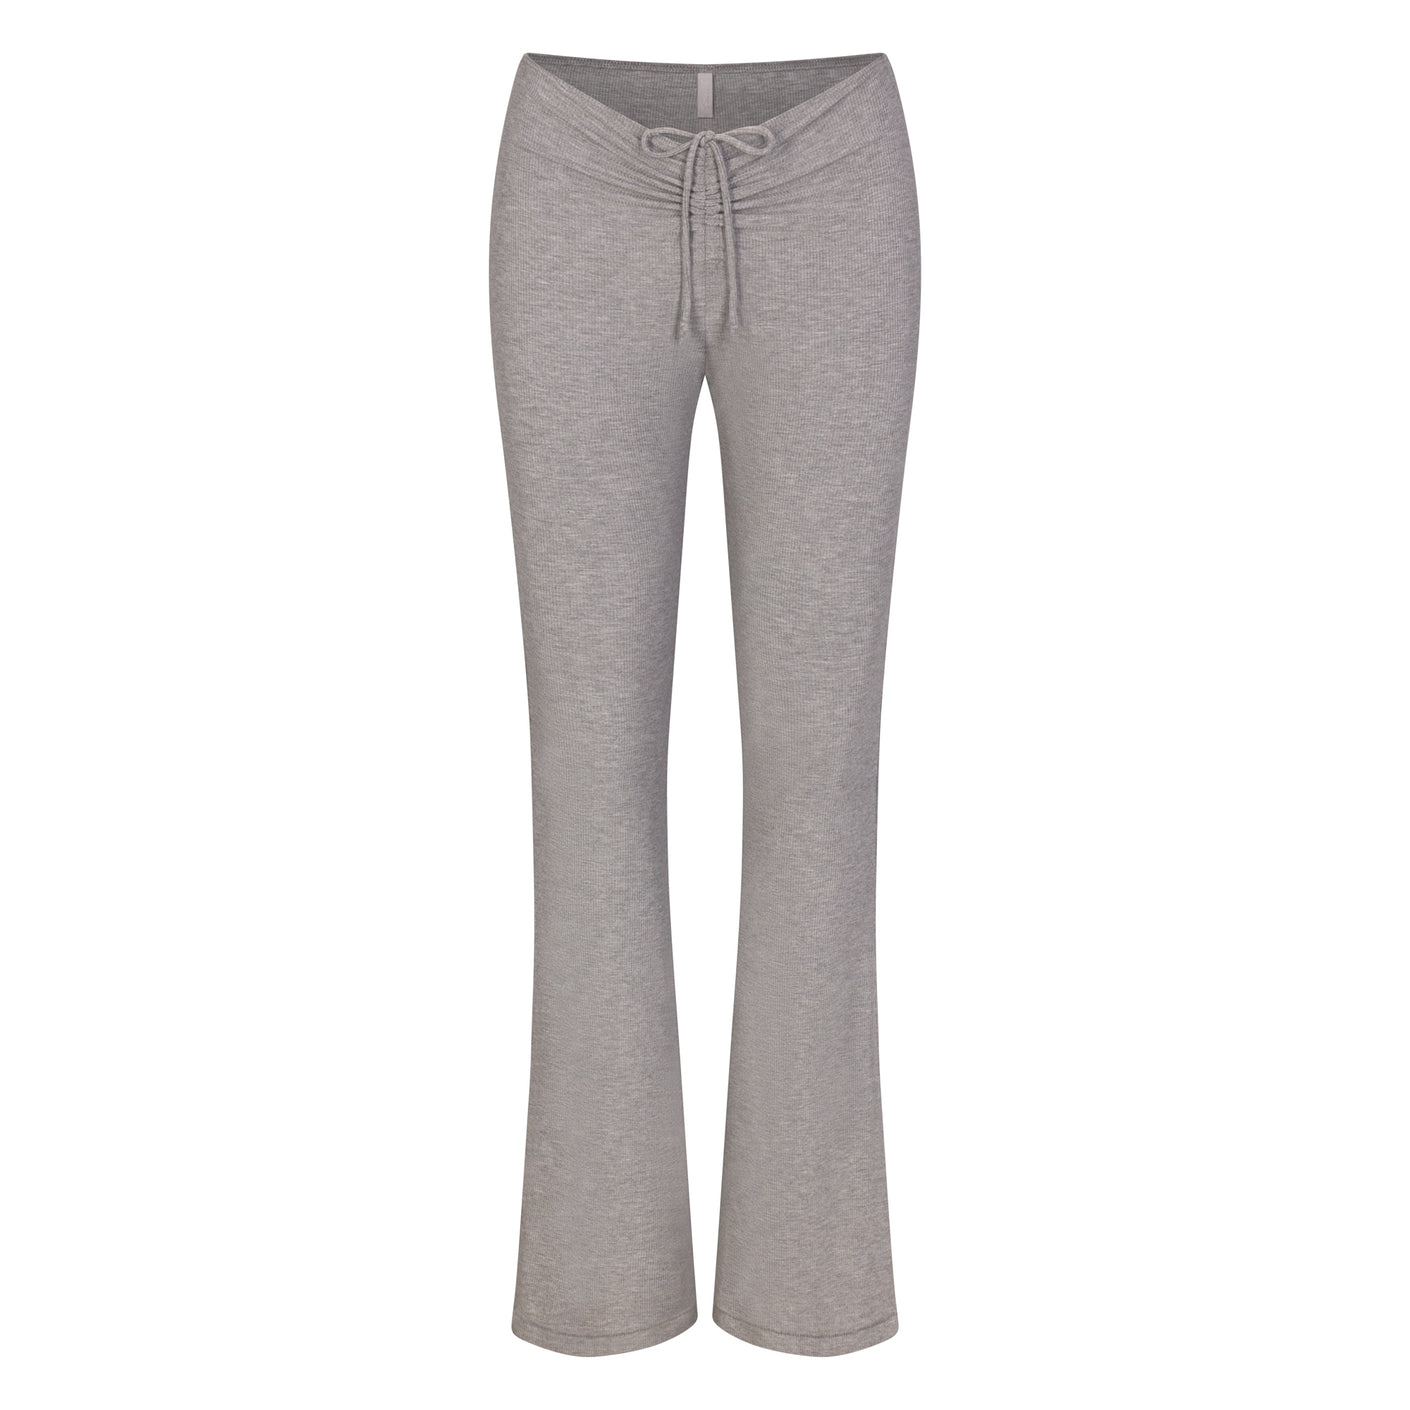 SOFT LOUNGE RUCHED PANT | HEATHER GREY